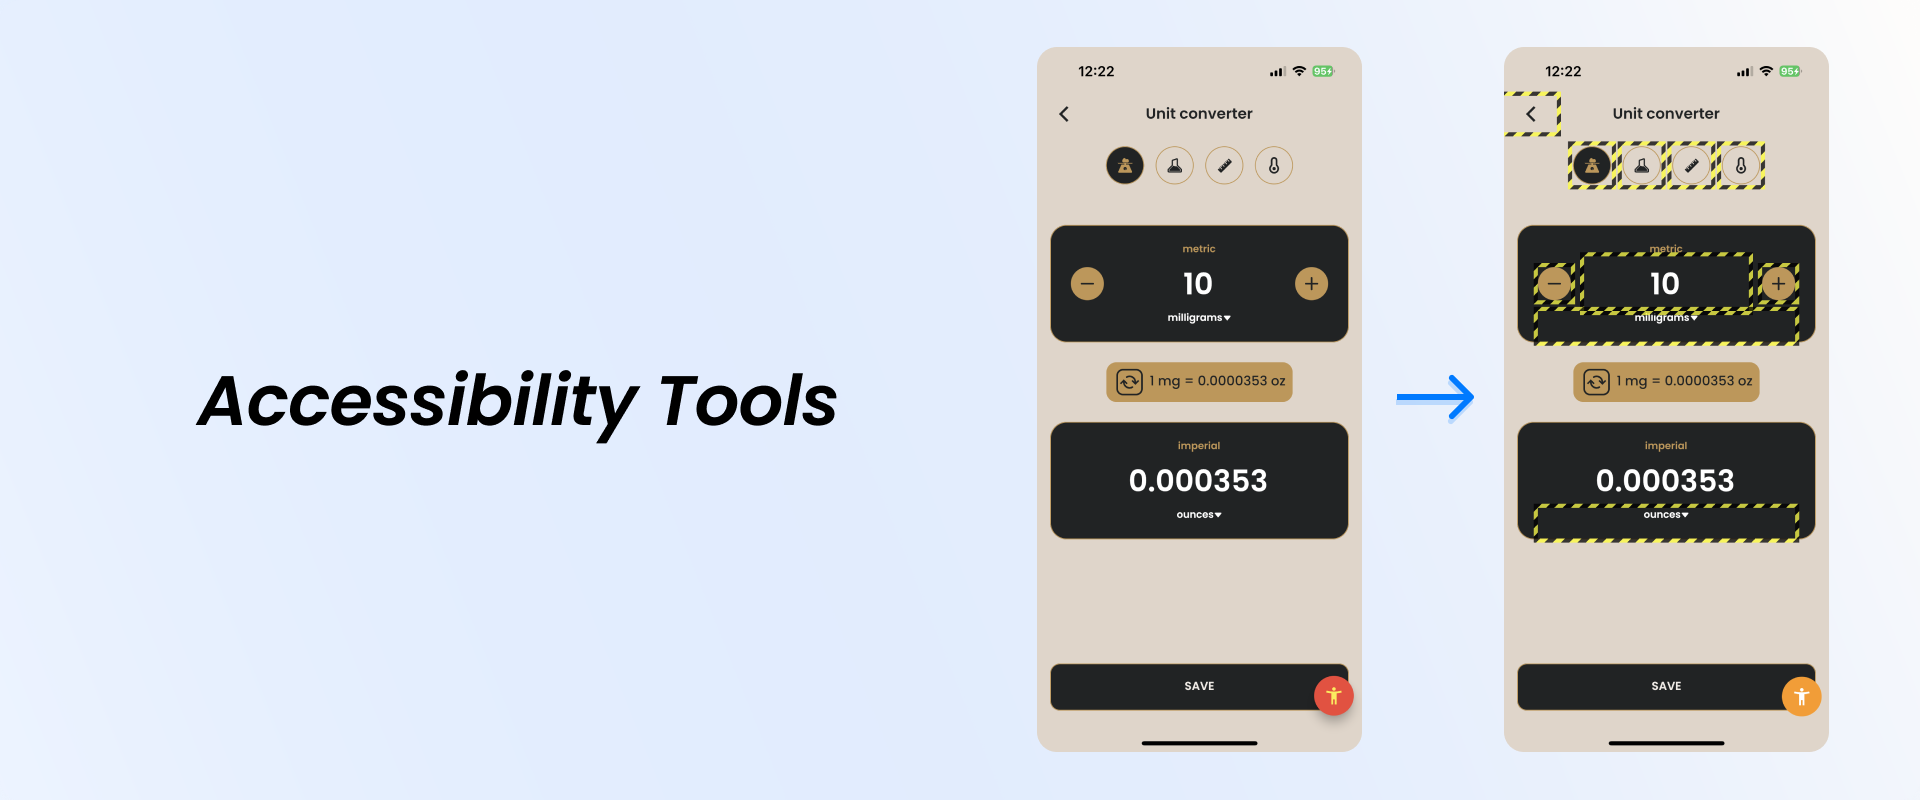 iOS Accessibility Tools large.png